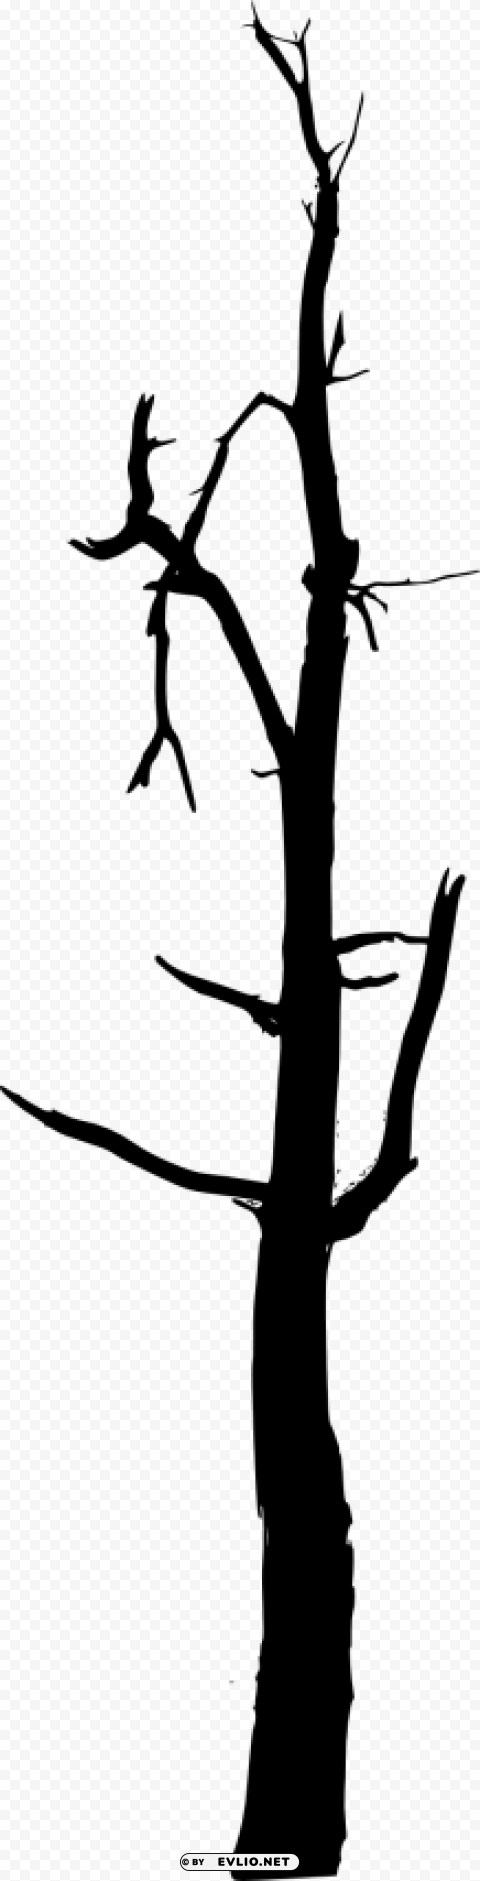 Transparent simple bare tree silhouette Isolated Artwork on HighQuality Transparent PNG PNG Image - ID 658c3725